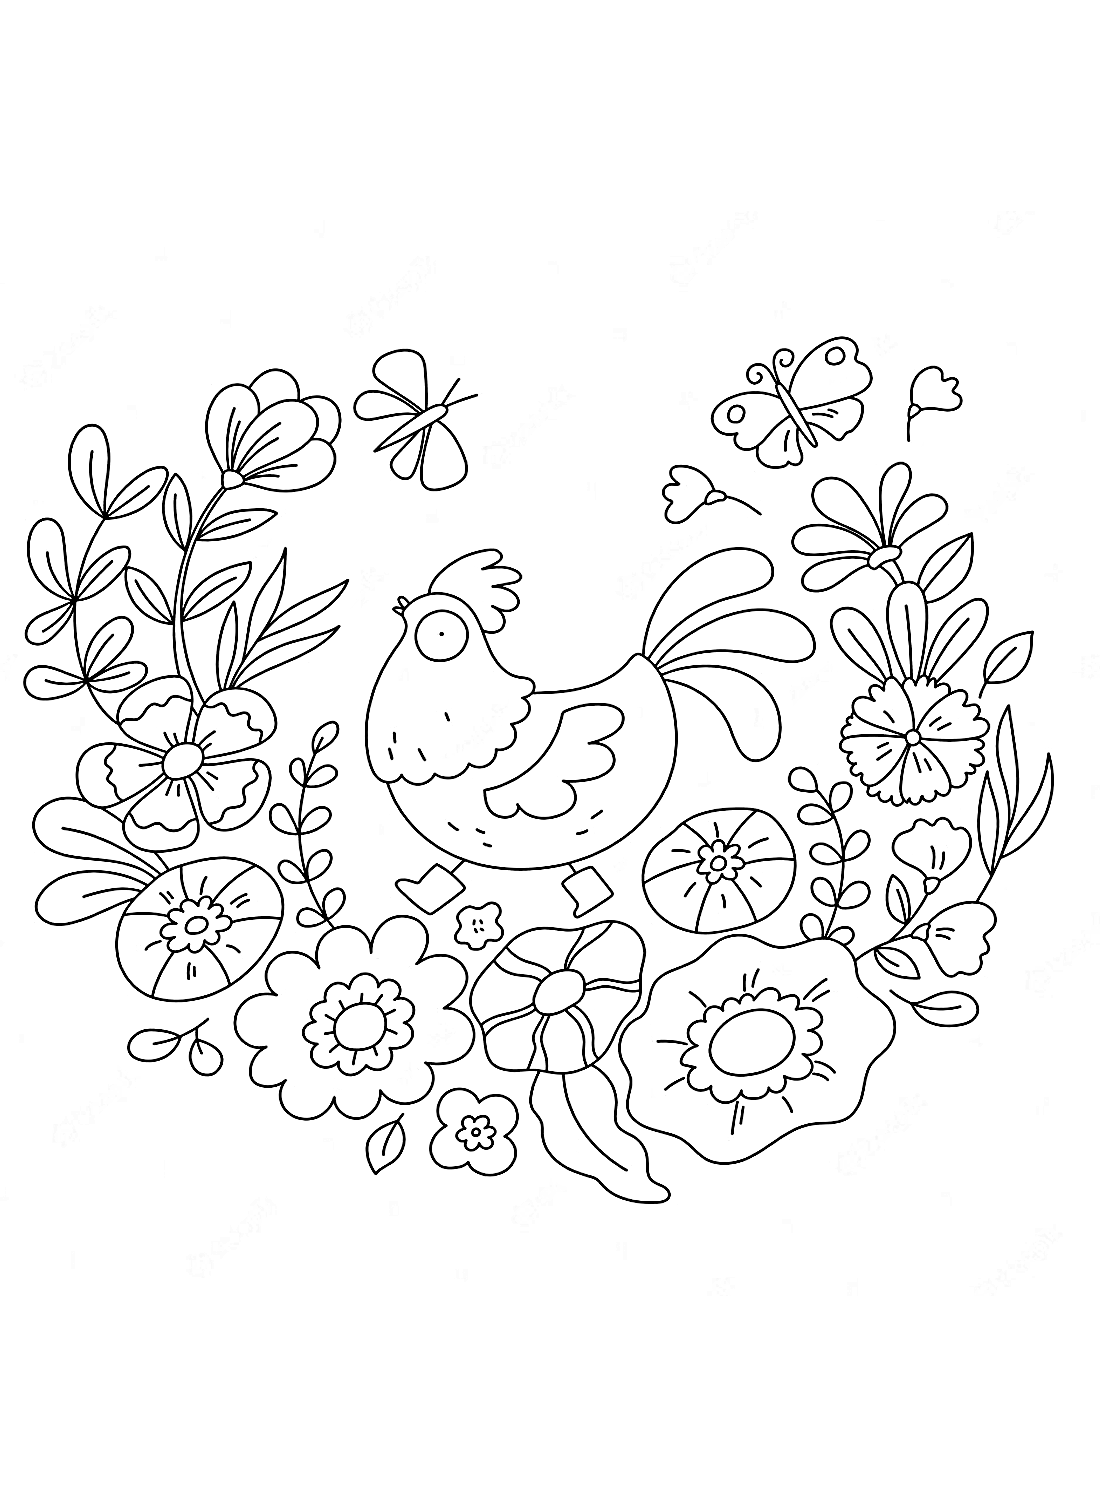 A fun rooster Coloring Pages